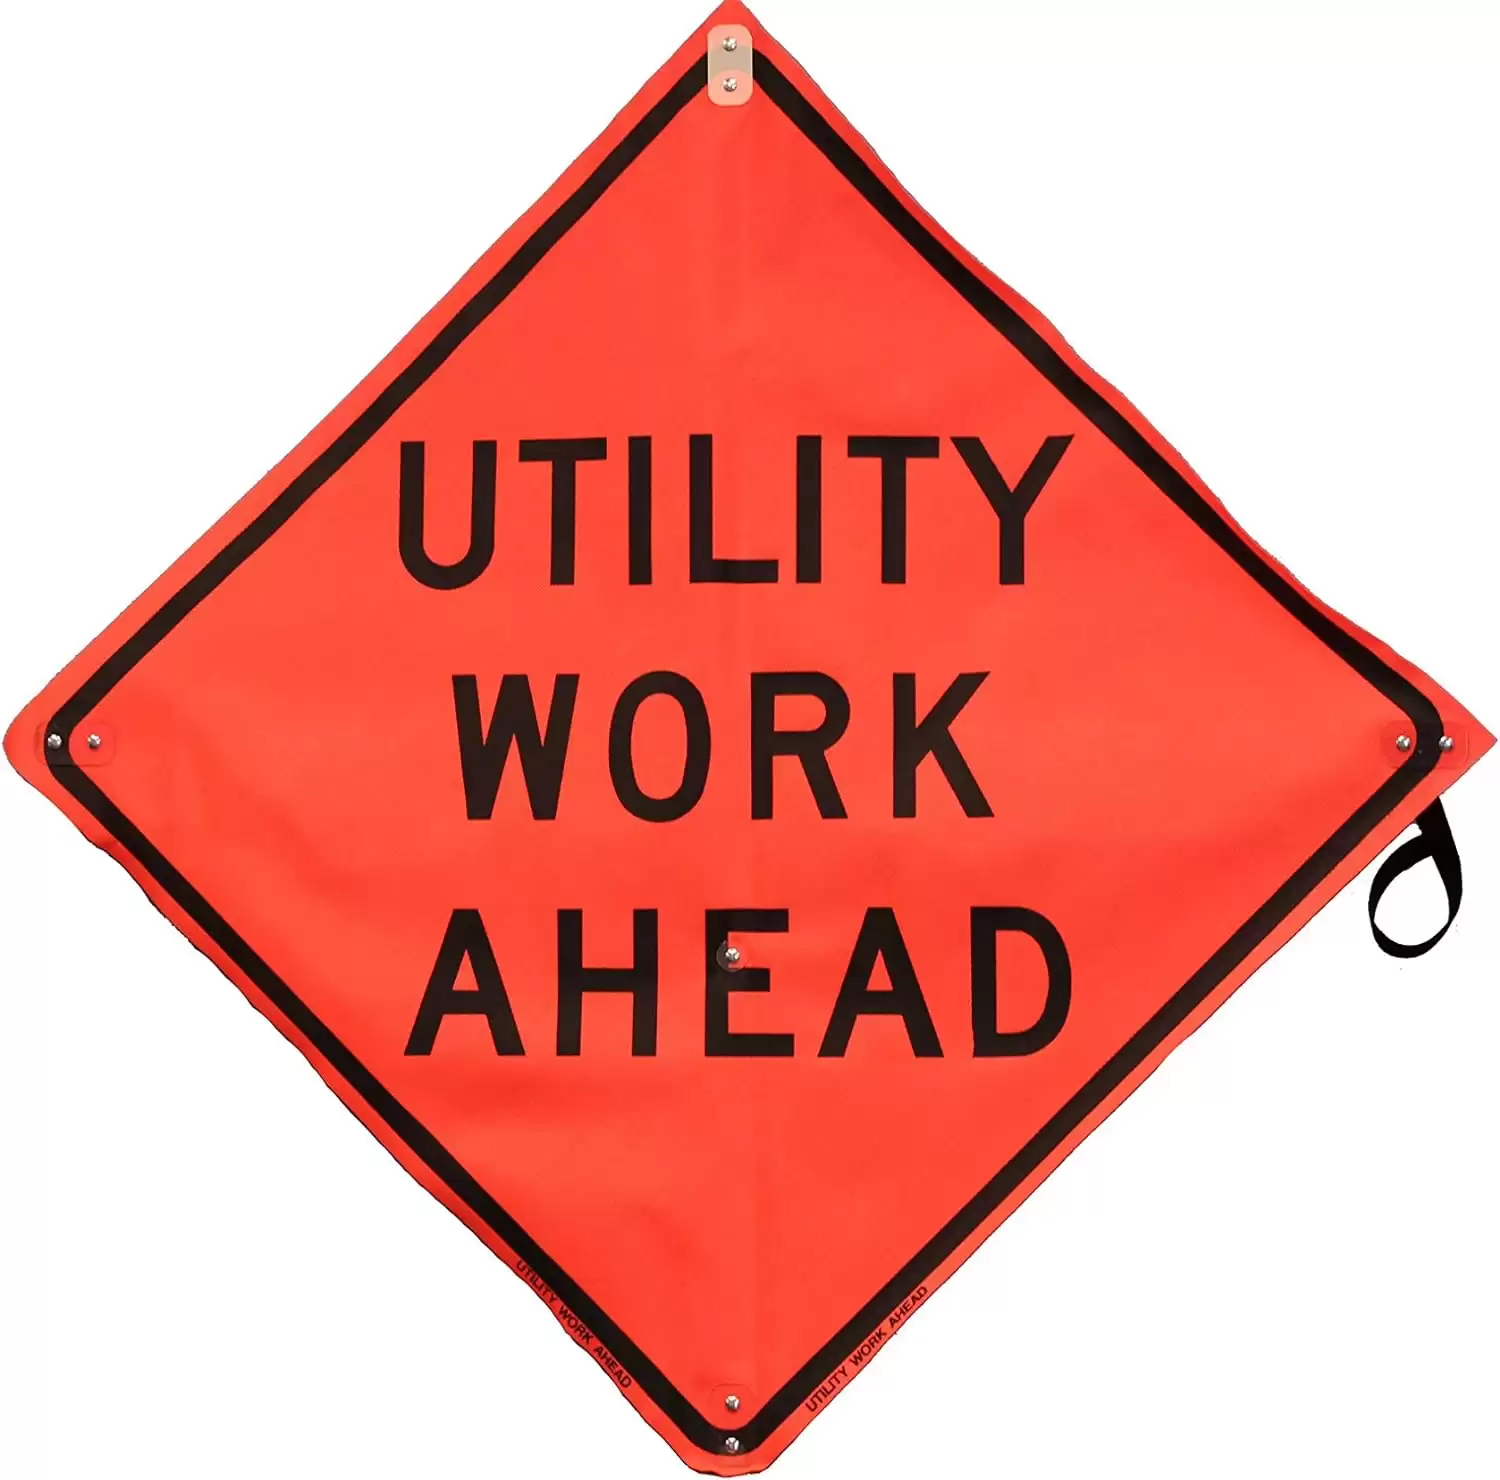 Utility Work Ahead MESH Roll-Up Warning Sign 48 inch